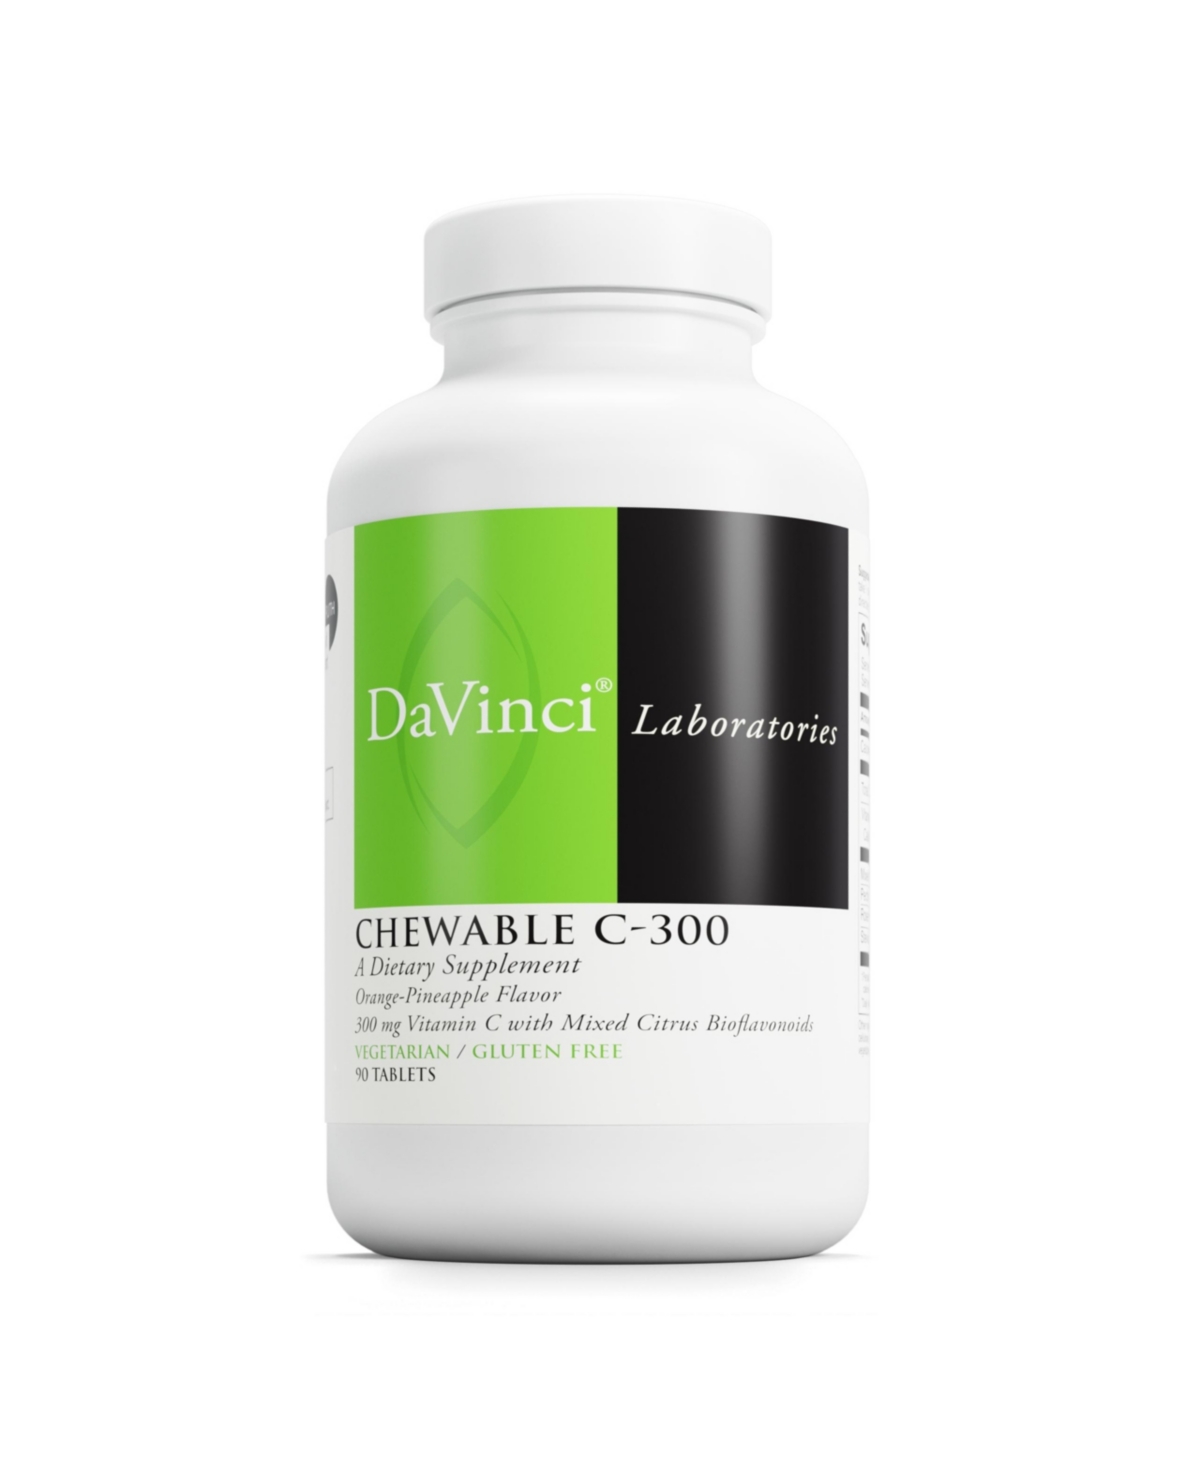 DaVinci Labs Chewable C-300 - Supplement to Support Immune Health, Cholesterol and Collagen Production - With Vitamin C, Pectin and More - Gluten-Free